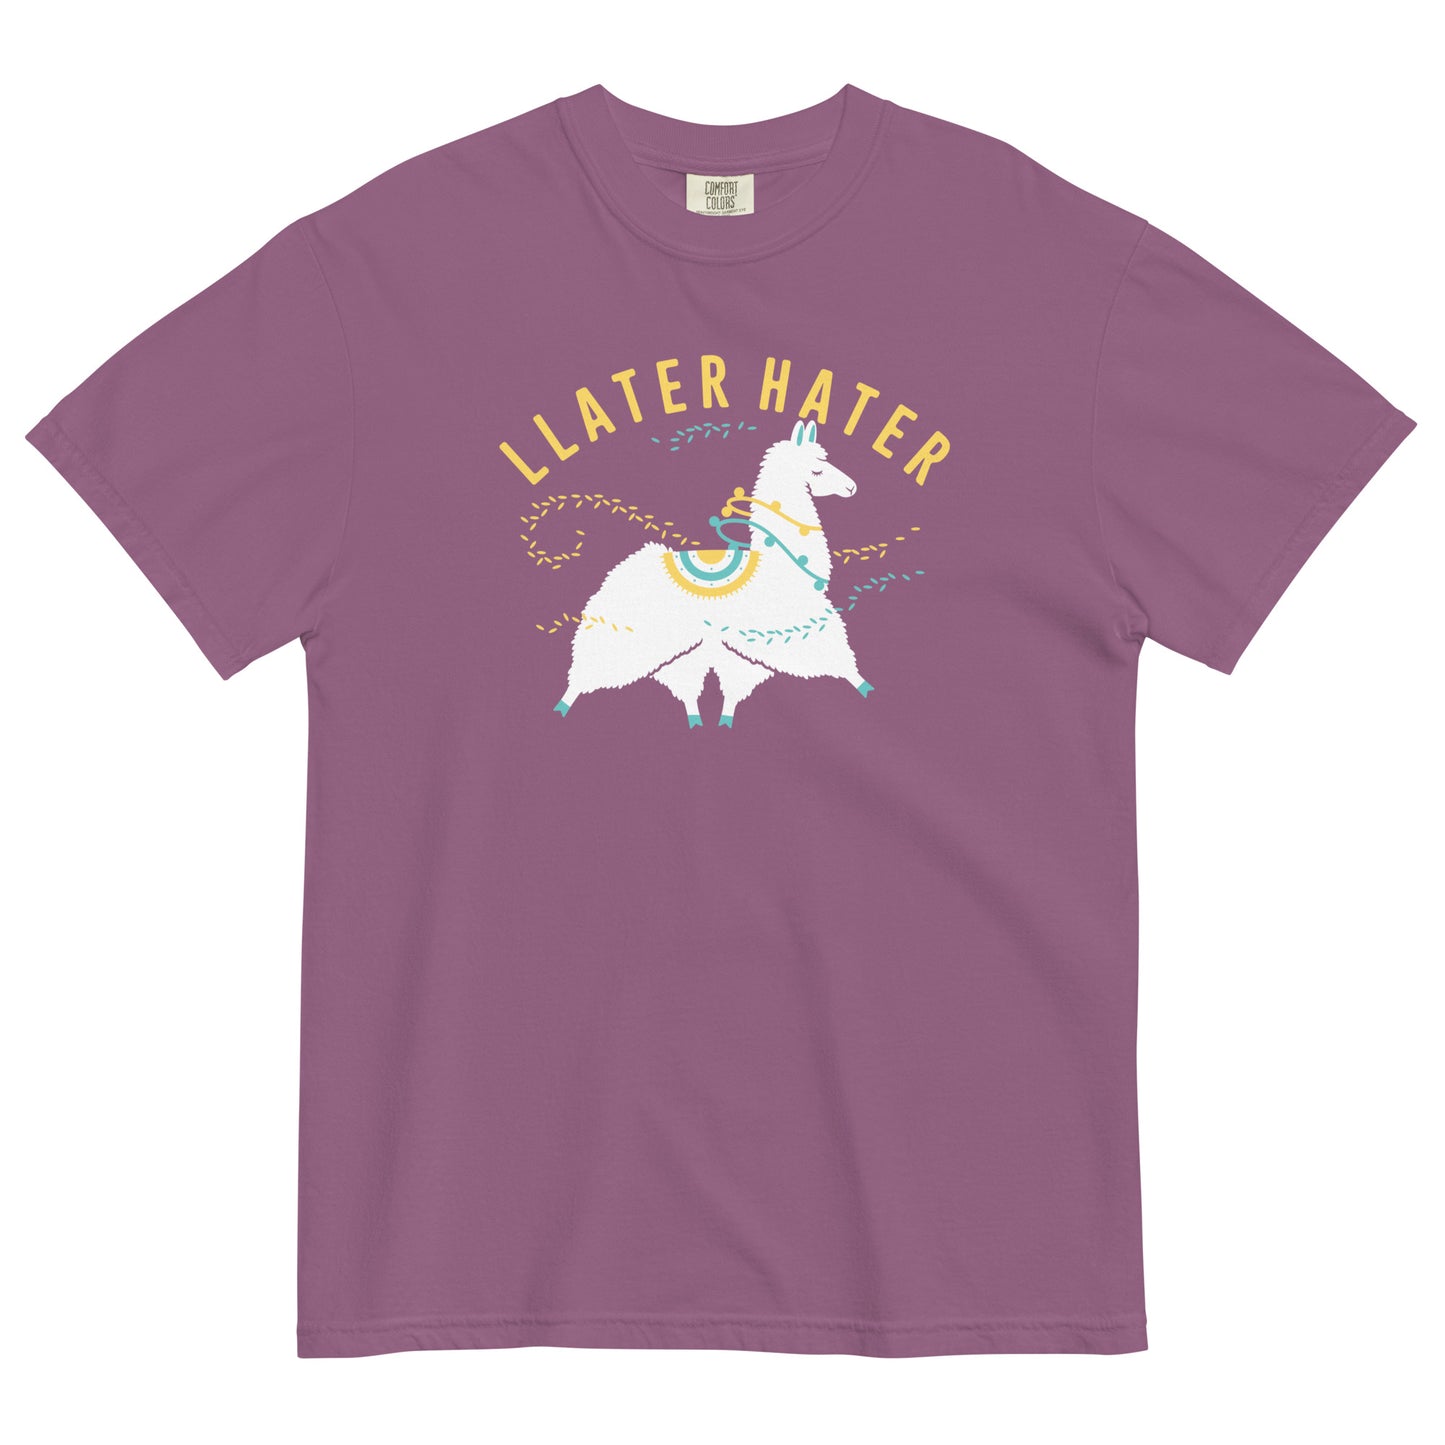 Llater Hater Men's Relaxed Fit Tee